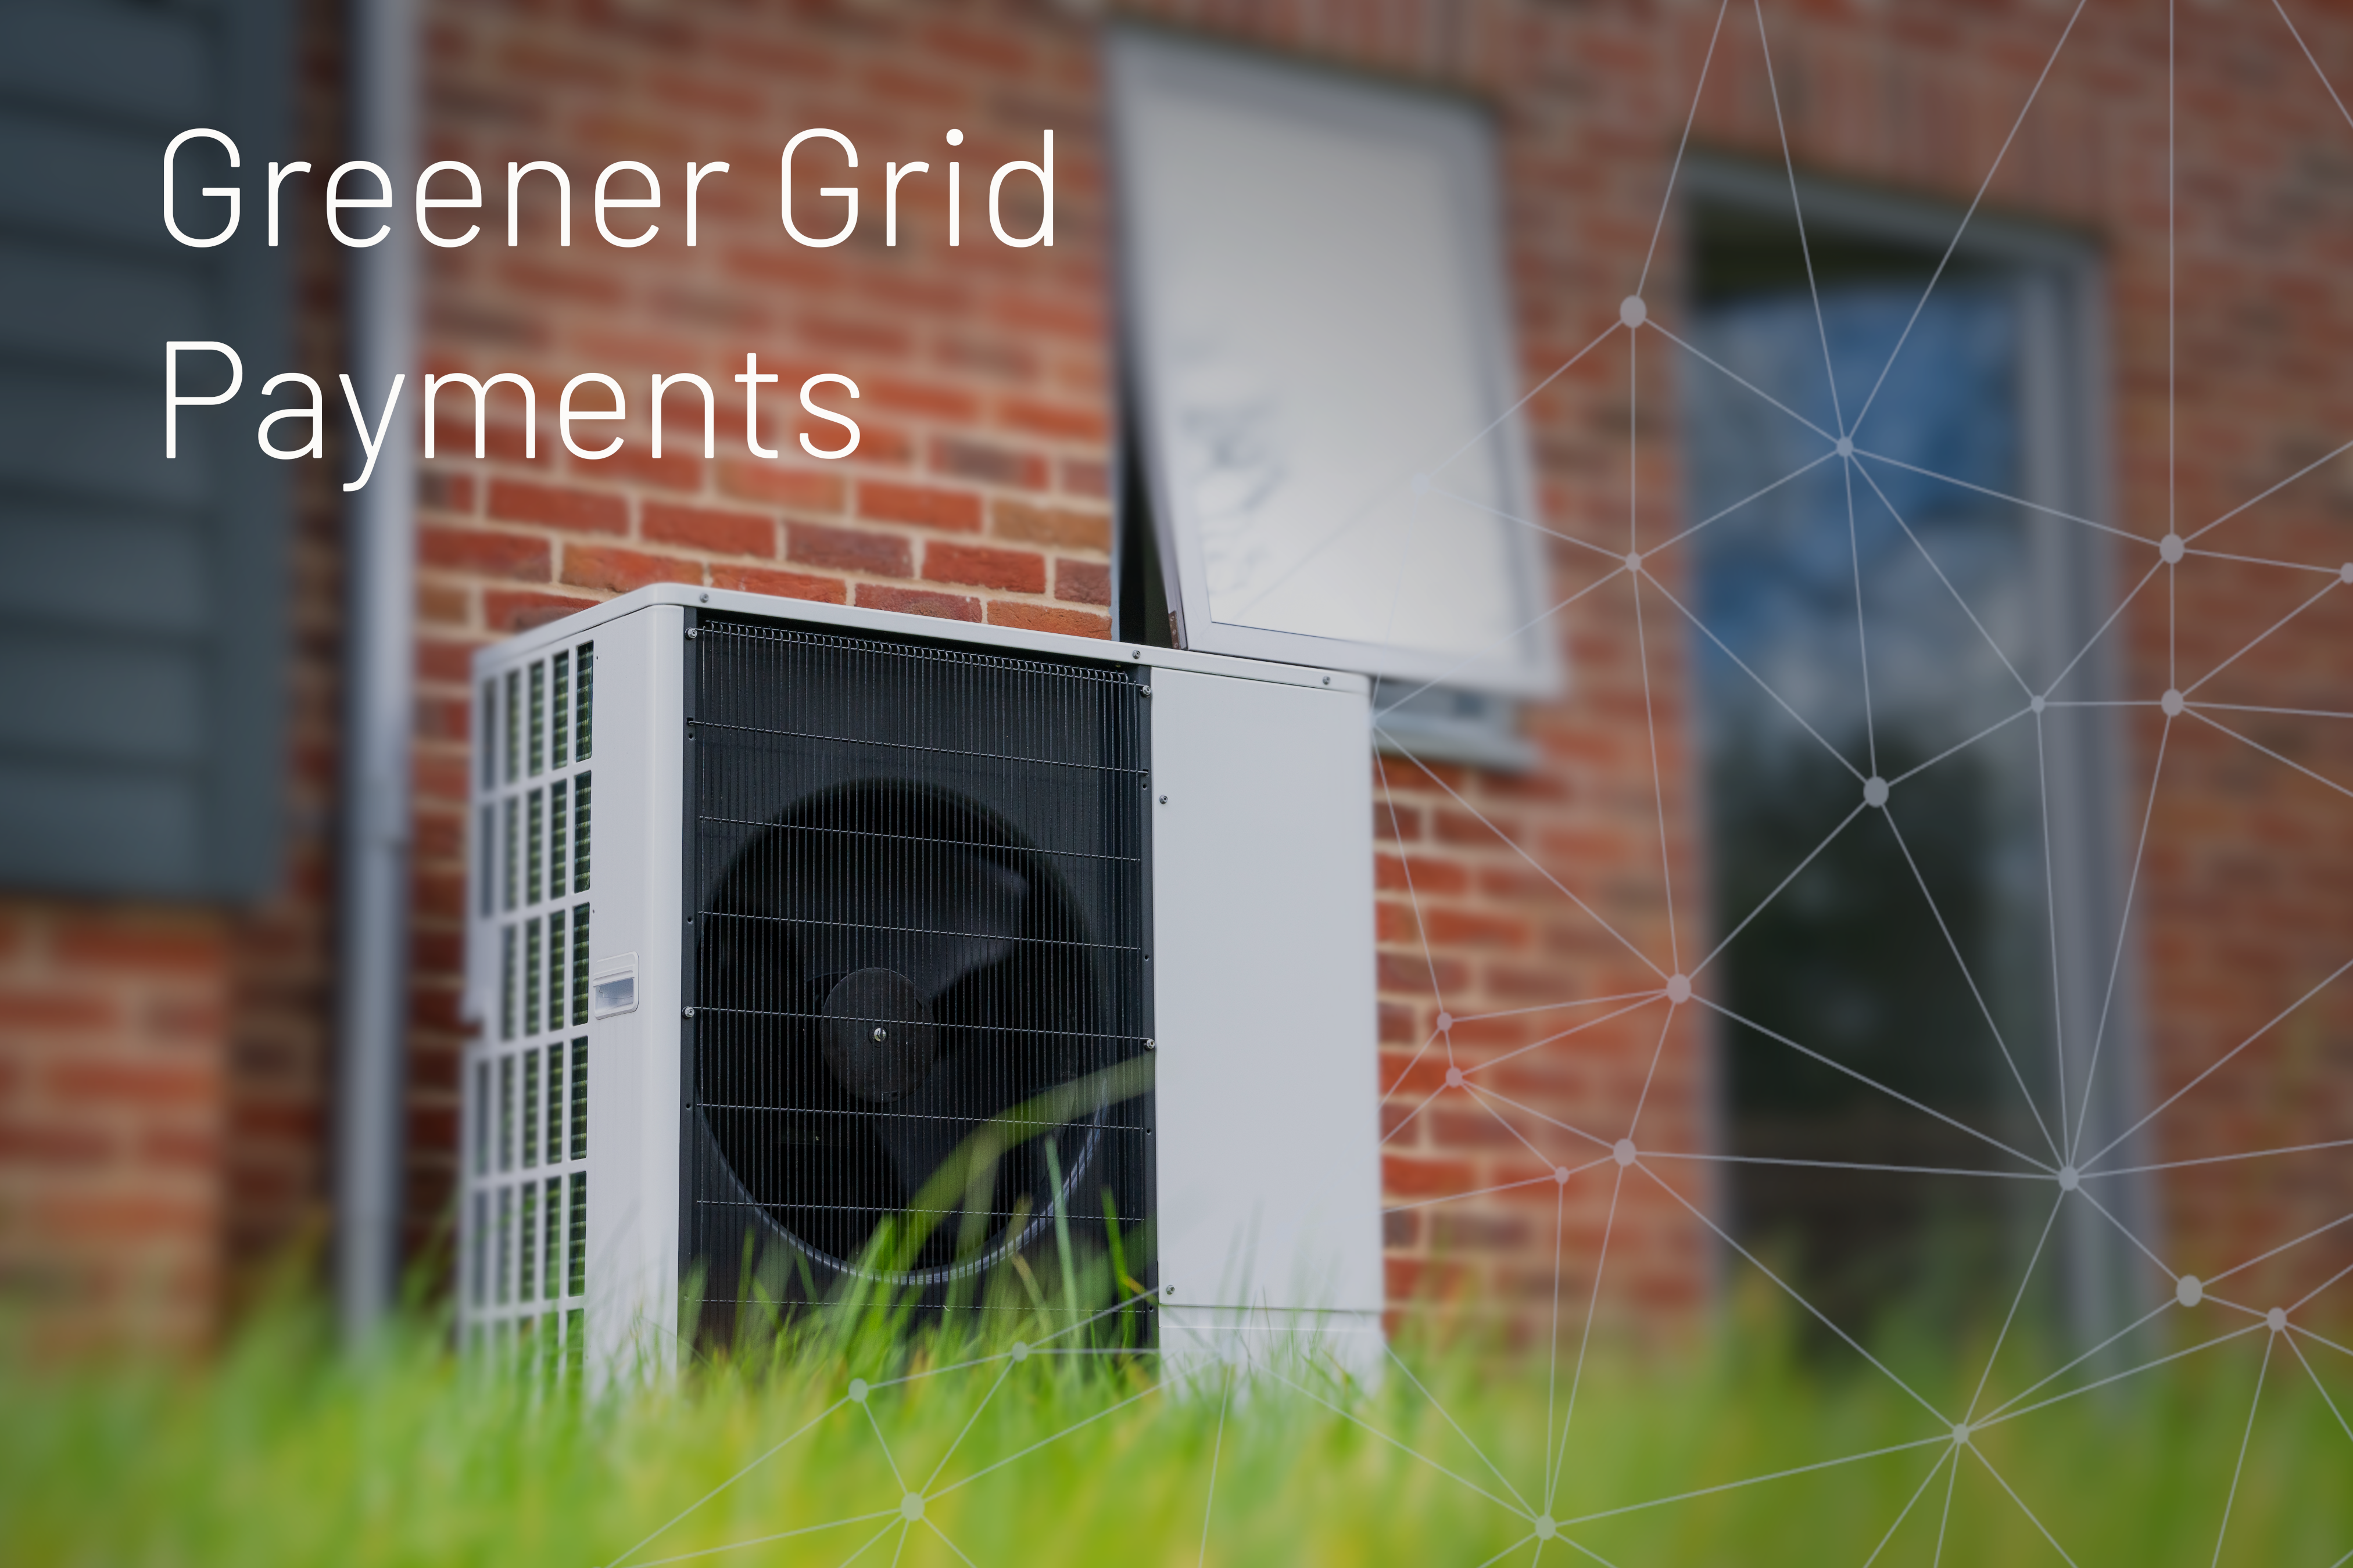 Greener Grid Payments - the results are in!